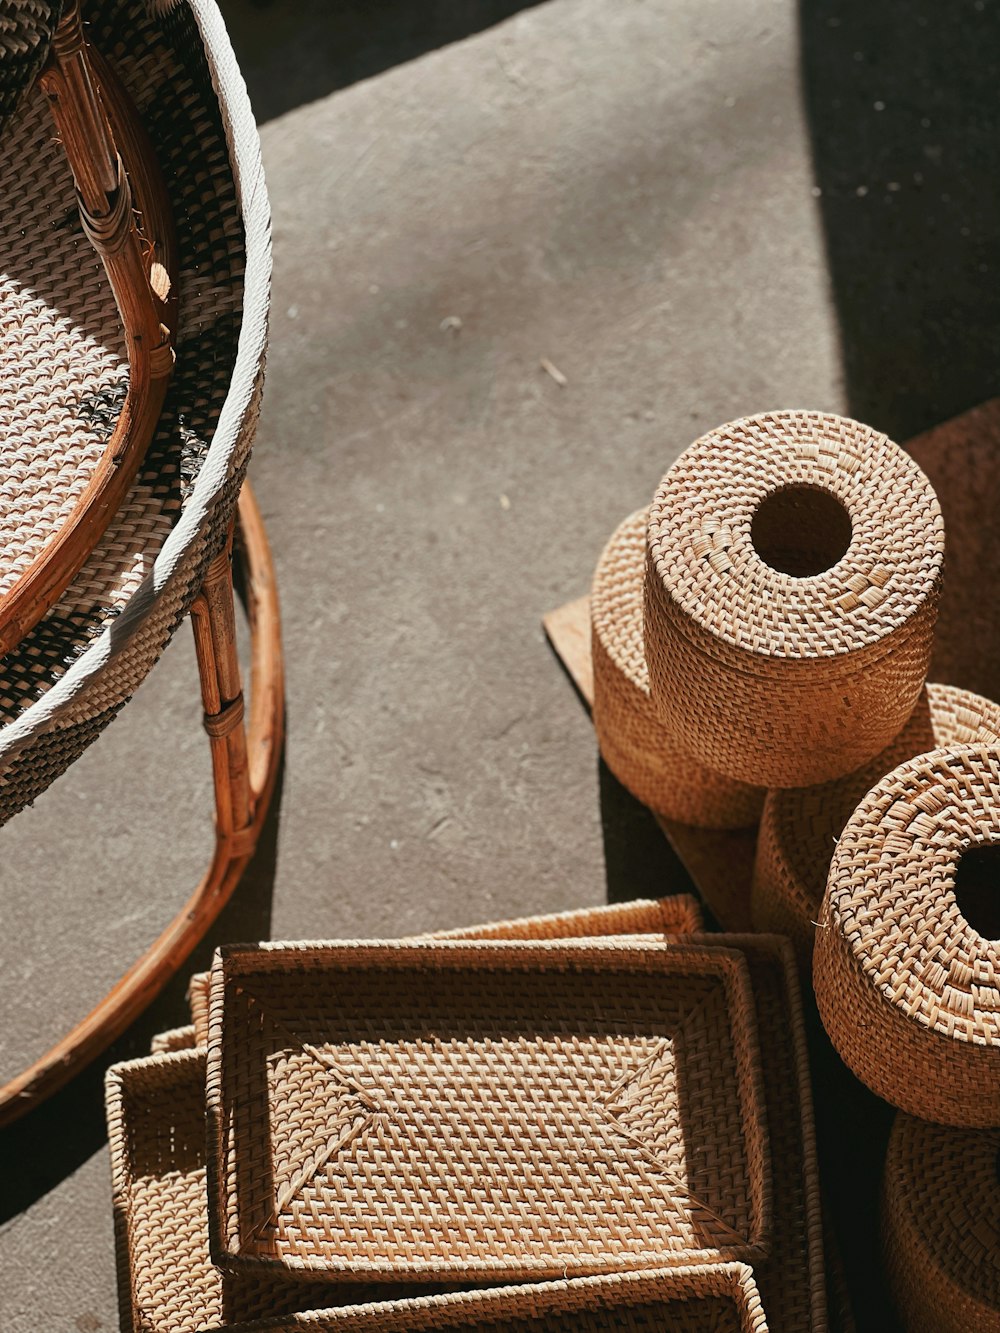 a group of woven baskets